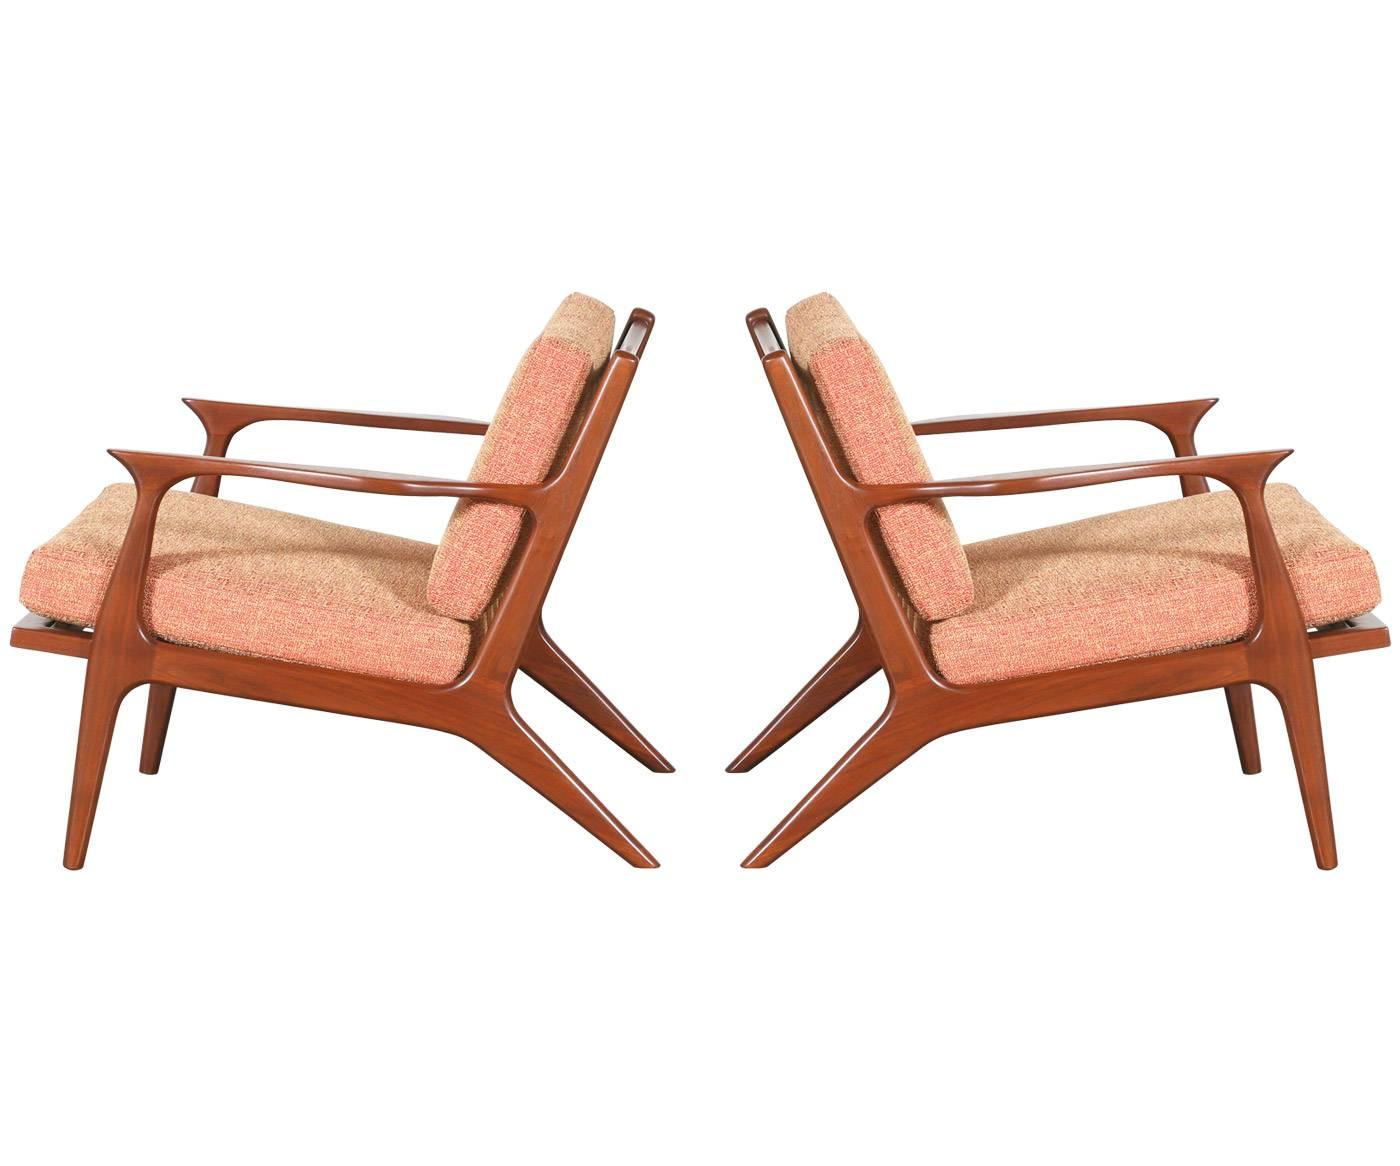 Pair of Mid-Century sculpted walnut lounge chairs. Designer: Unknown.
Manufacturer: Unknown.
Period/Style: Mid-Century Modern.
Country: United States.
Date: 1950s.

Dimensions: 34.75″ H x 24.5″ W x 21″ D.
Materials: Walnut and new cotton